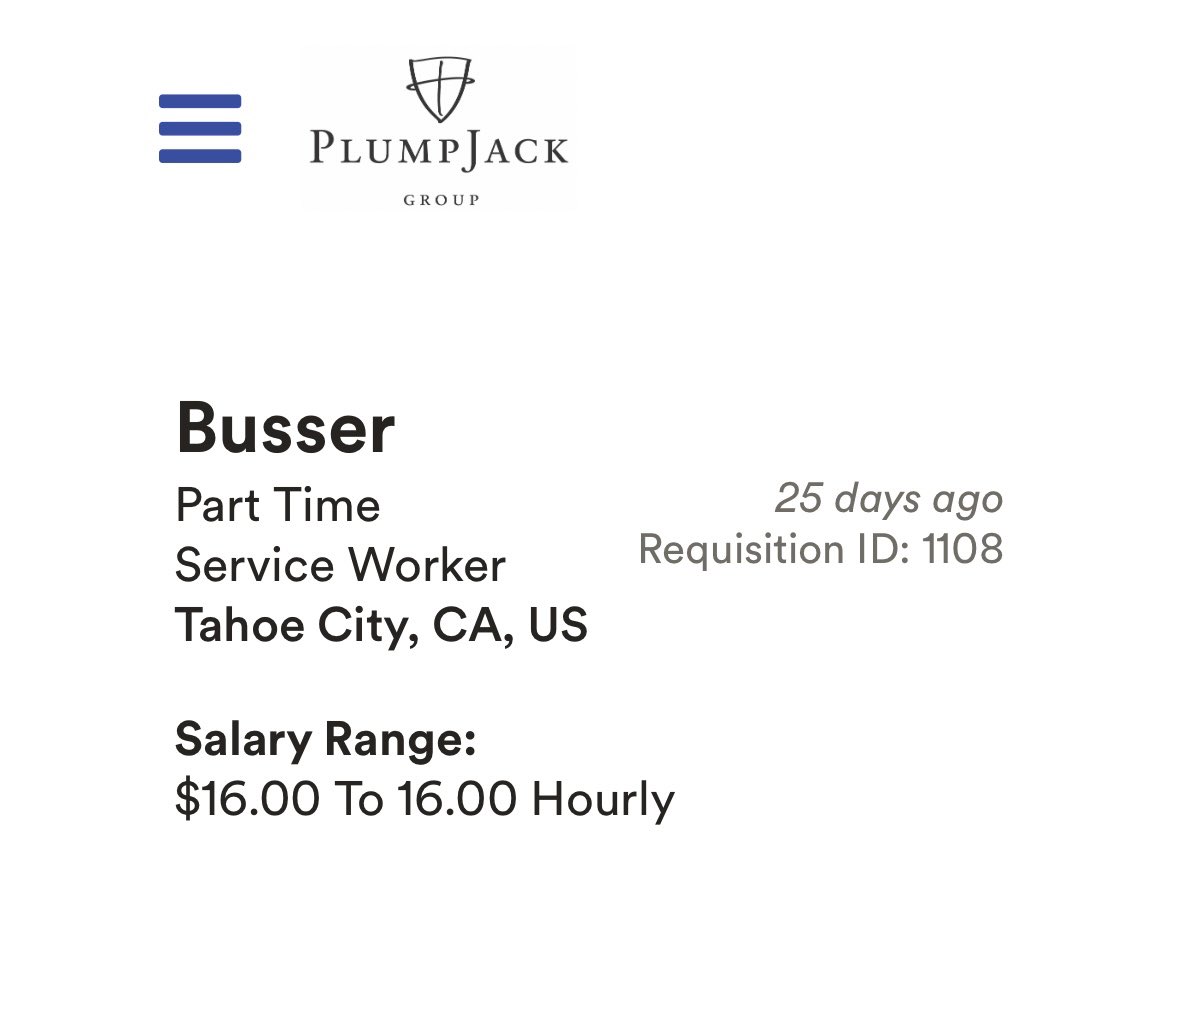 California just raised the fast food minimum wage to $20 an hour for restaurants such as McDonald’s, Chipotle and Burger King. This is the starting wage for a person that wants to work @GavinNewsom’s restaurant: